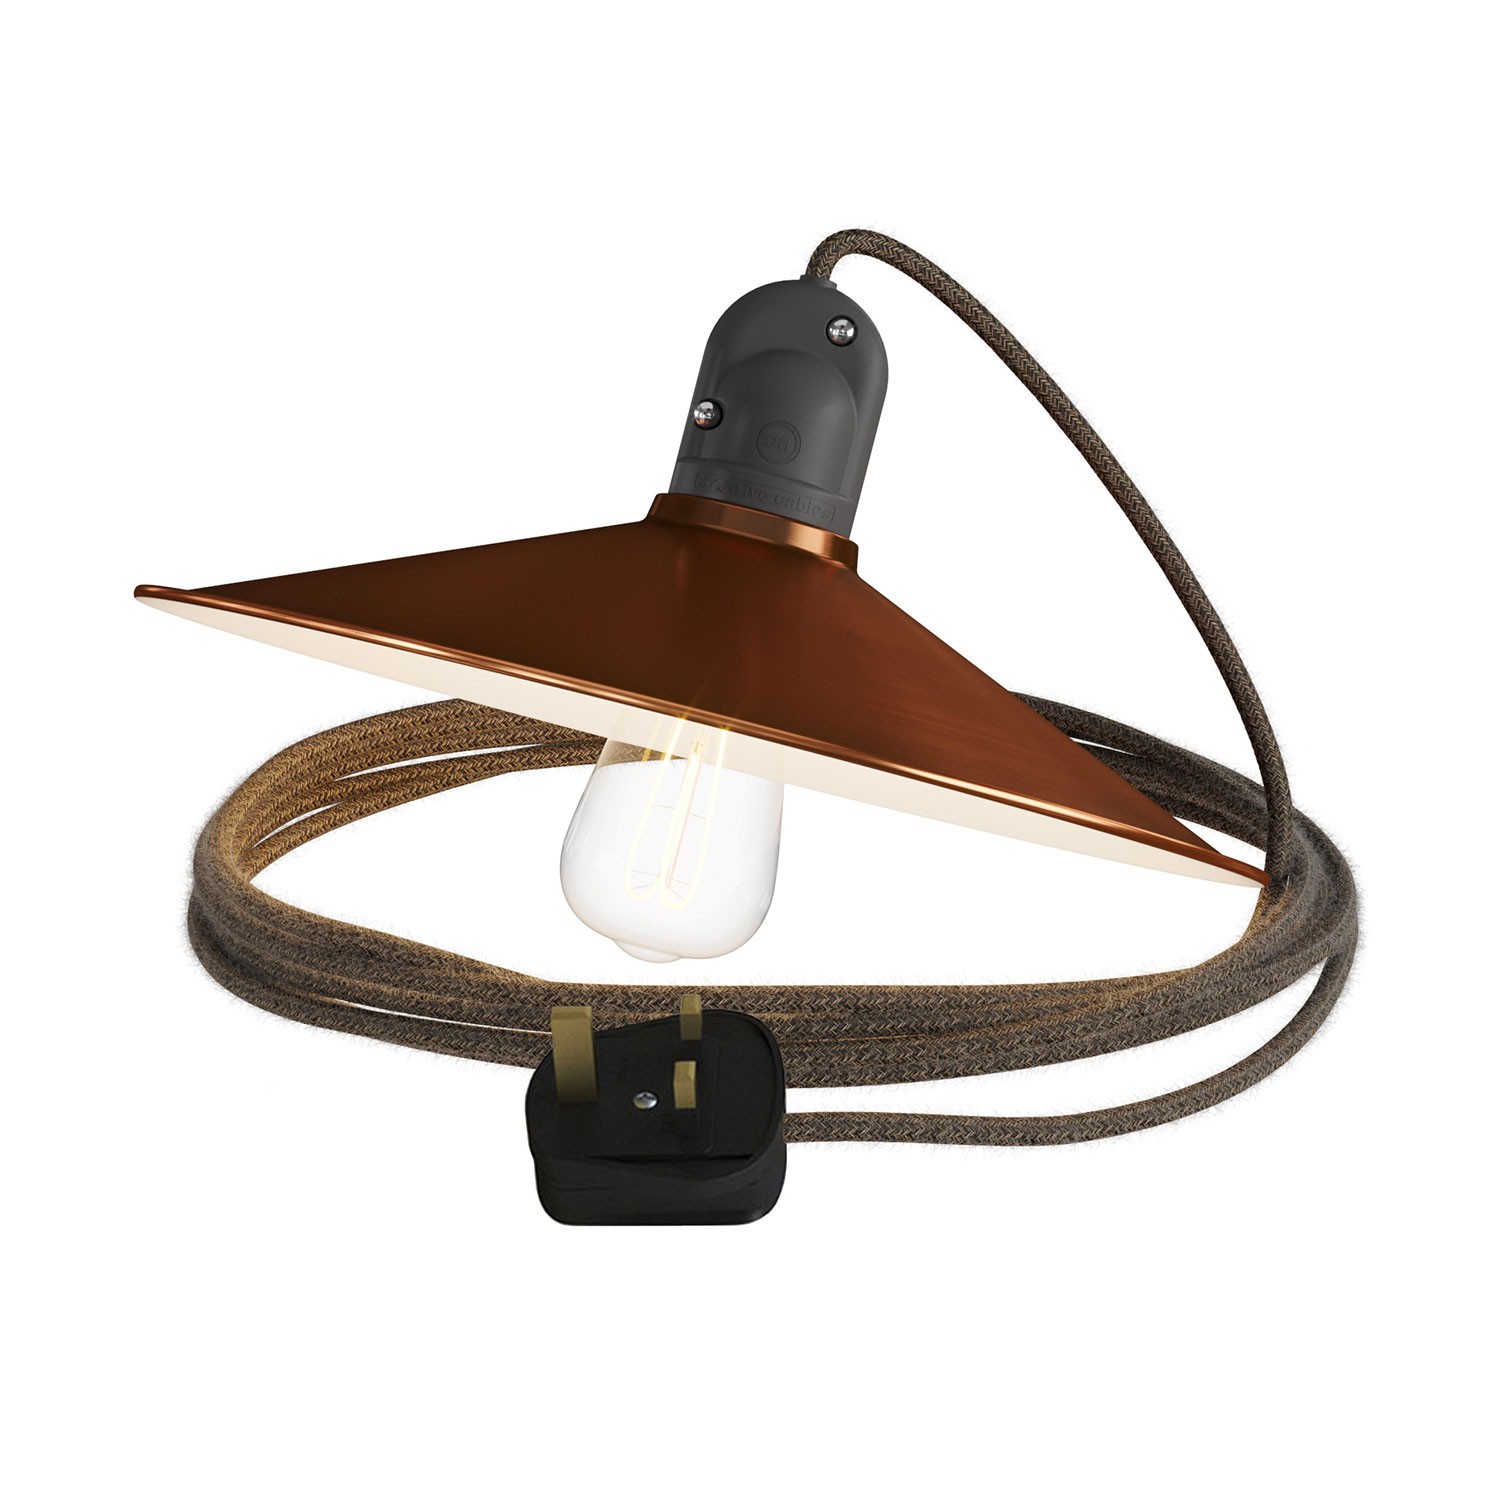 Eiva Snake with Swing shade, portable outdoor lamp, 5 m textile cable, UK plug and IP65 waterproof lamp holder